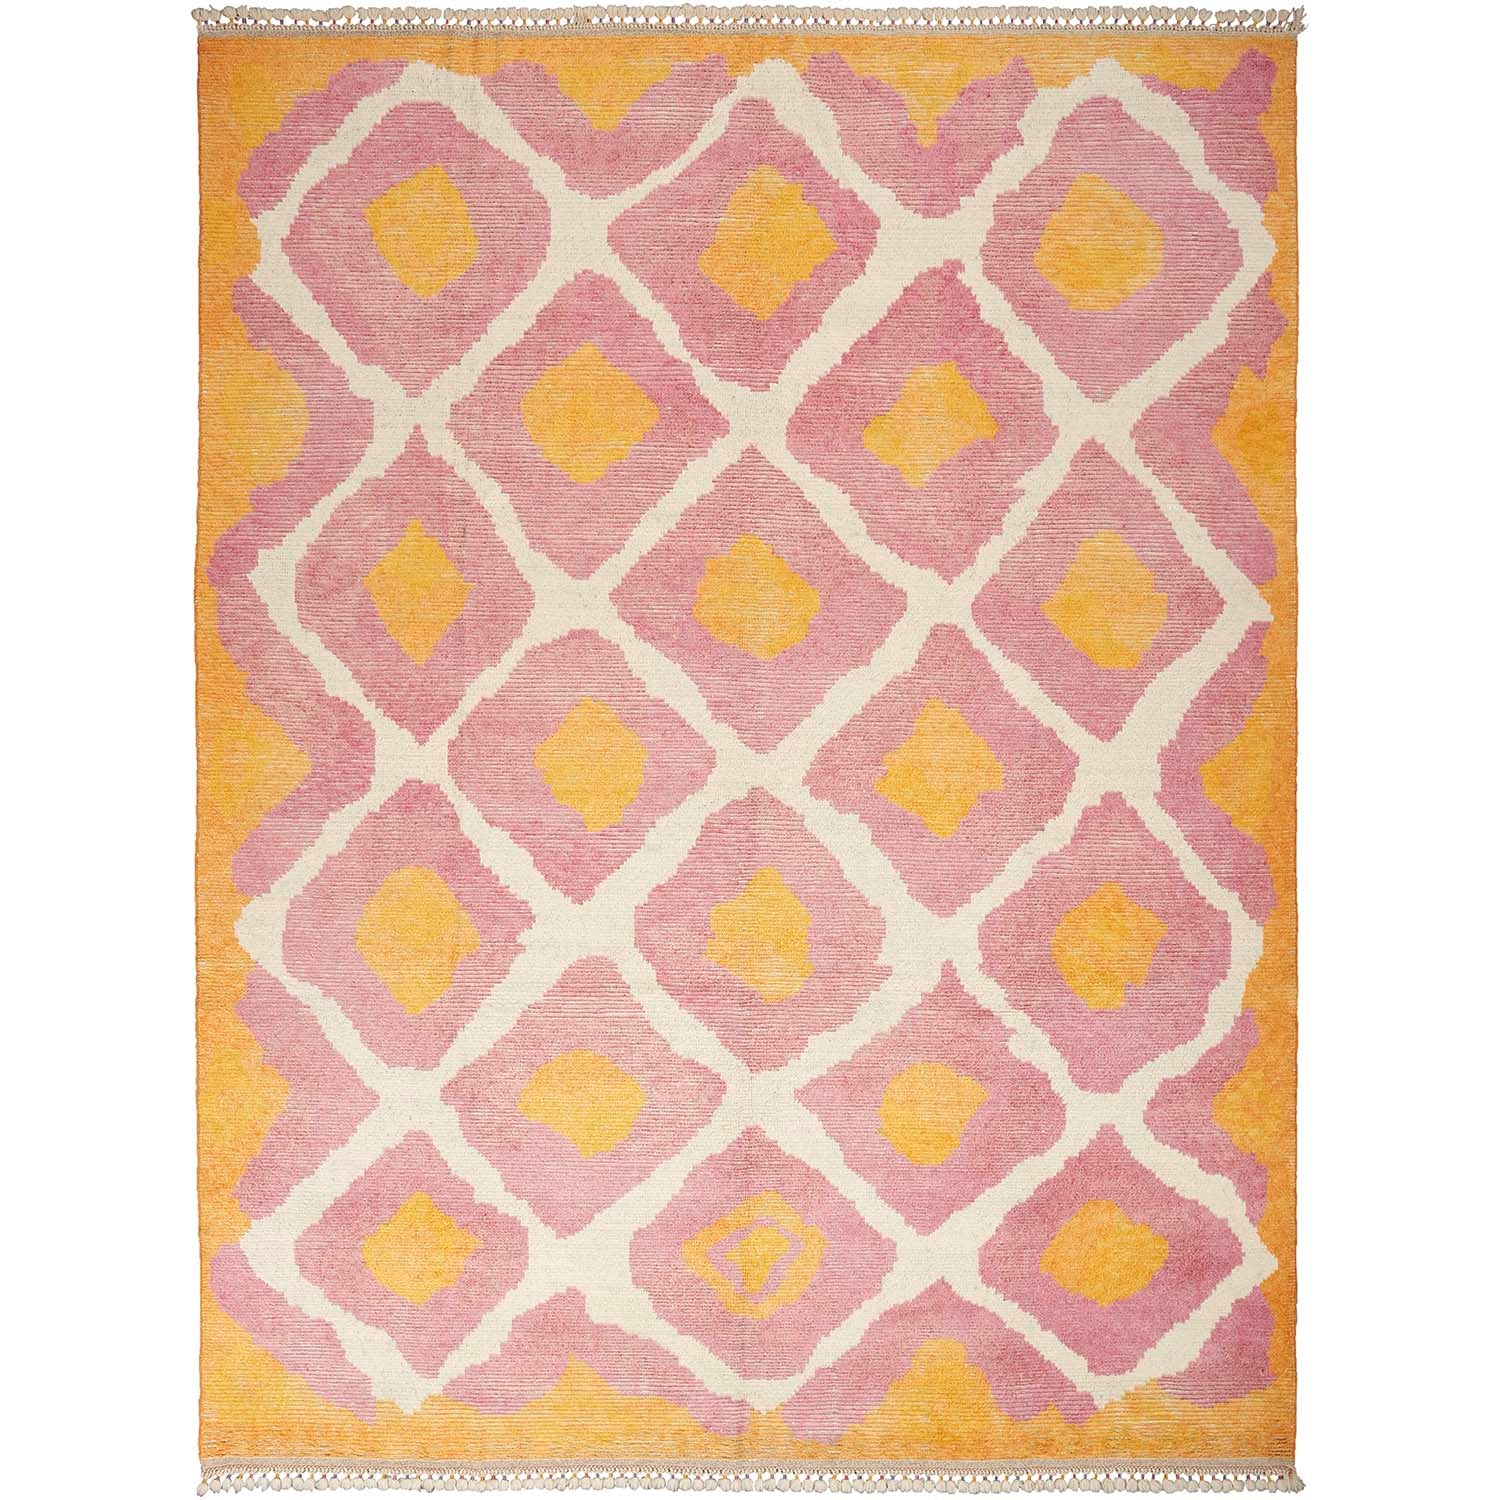 Vibrantly patterned rectangular area rug with geometric motifs and fringe.